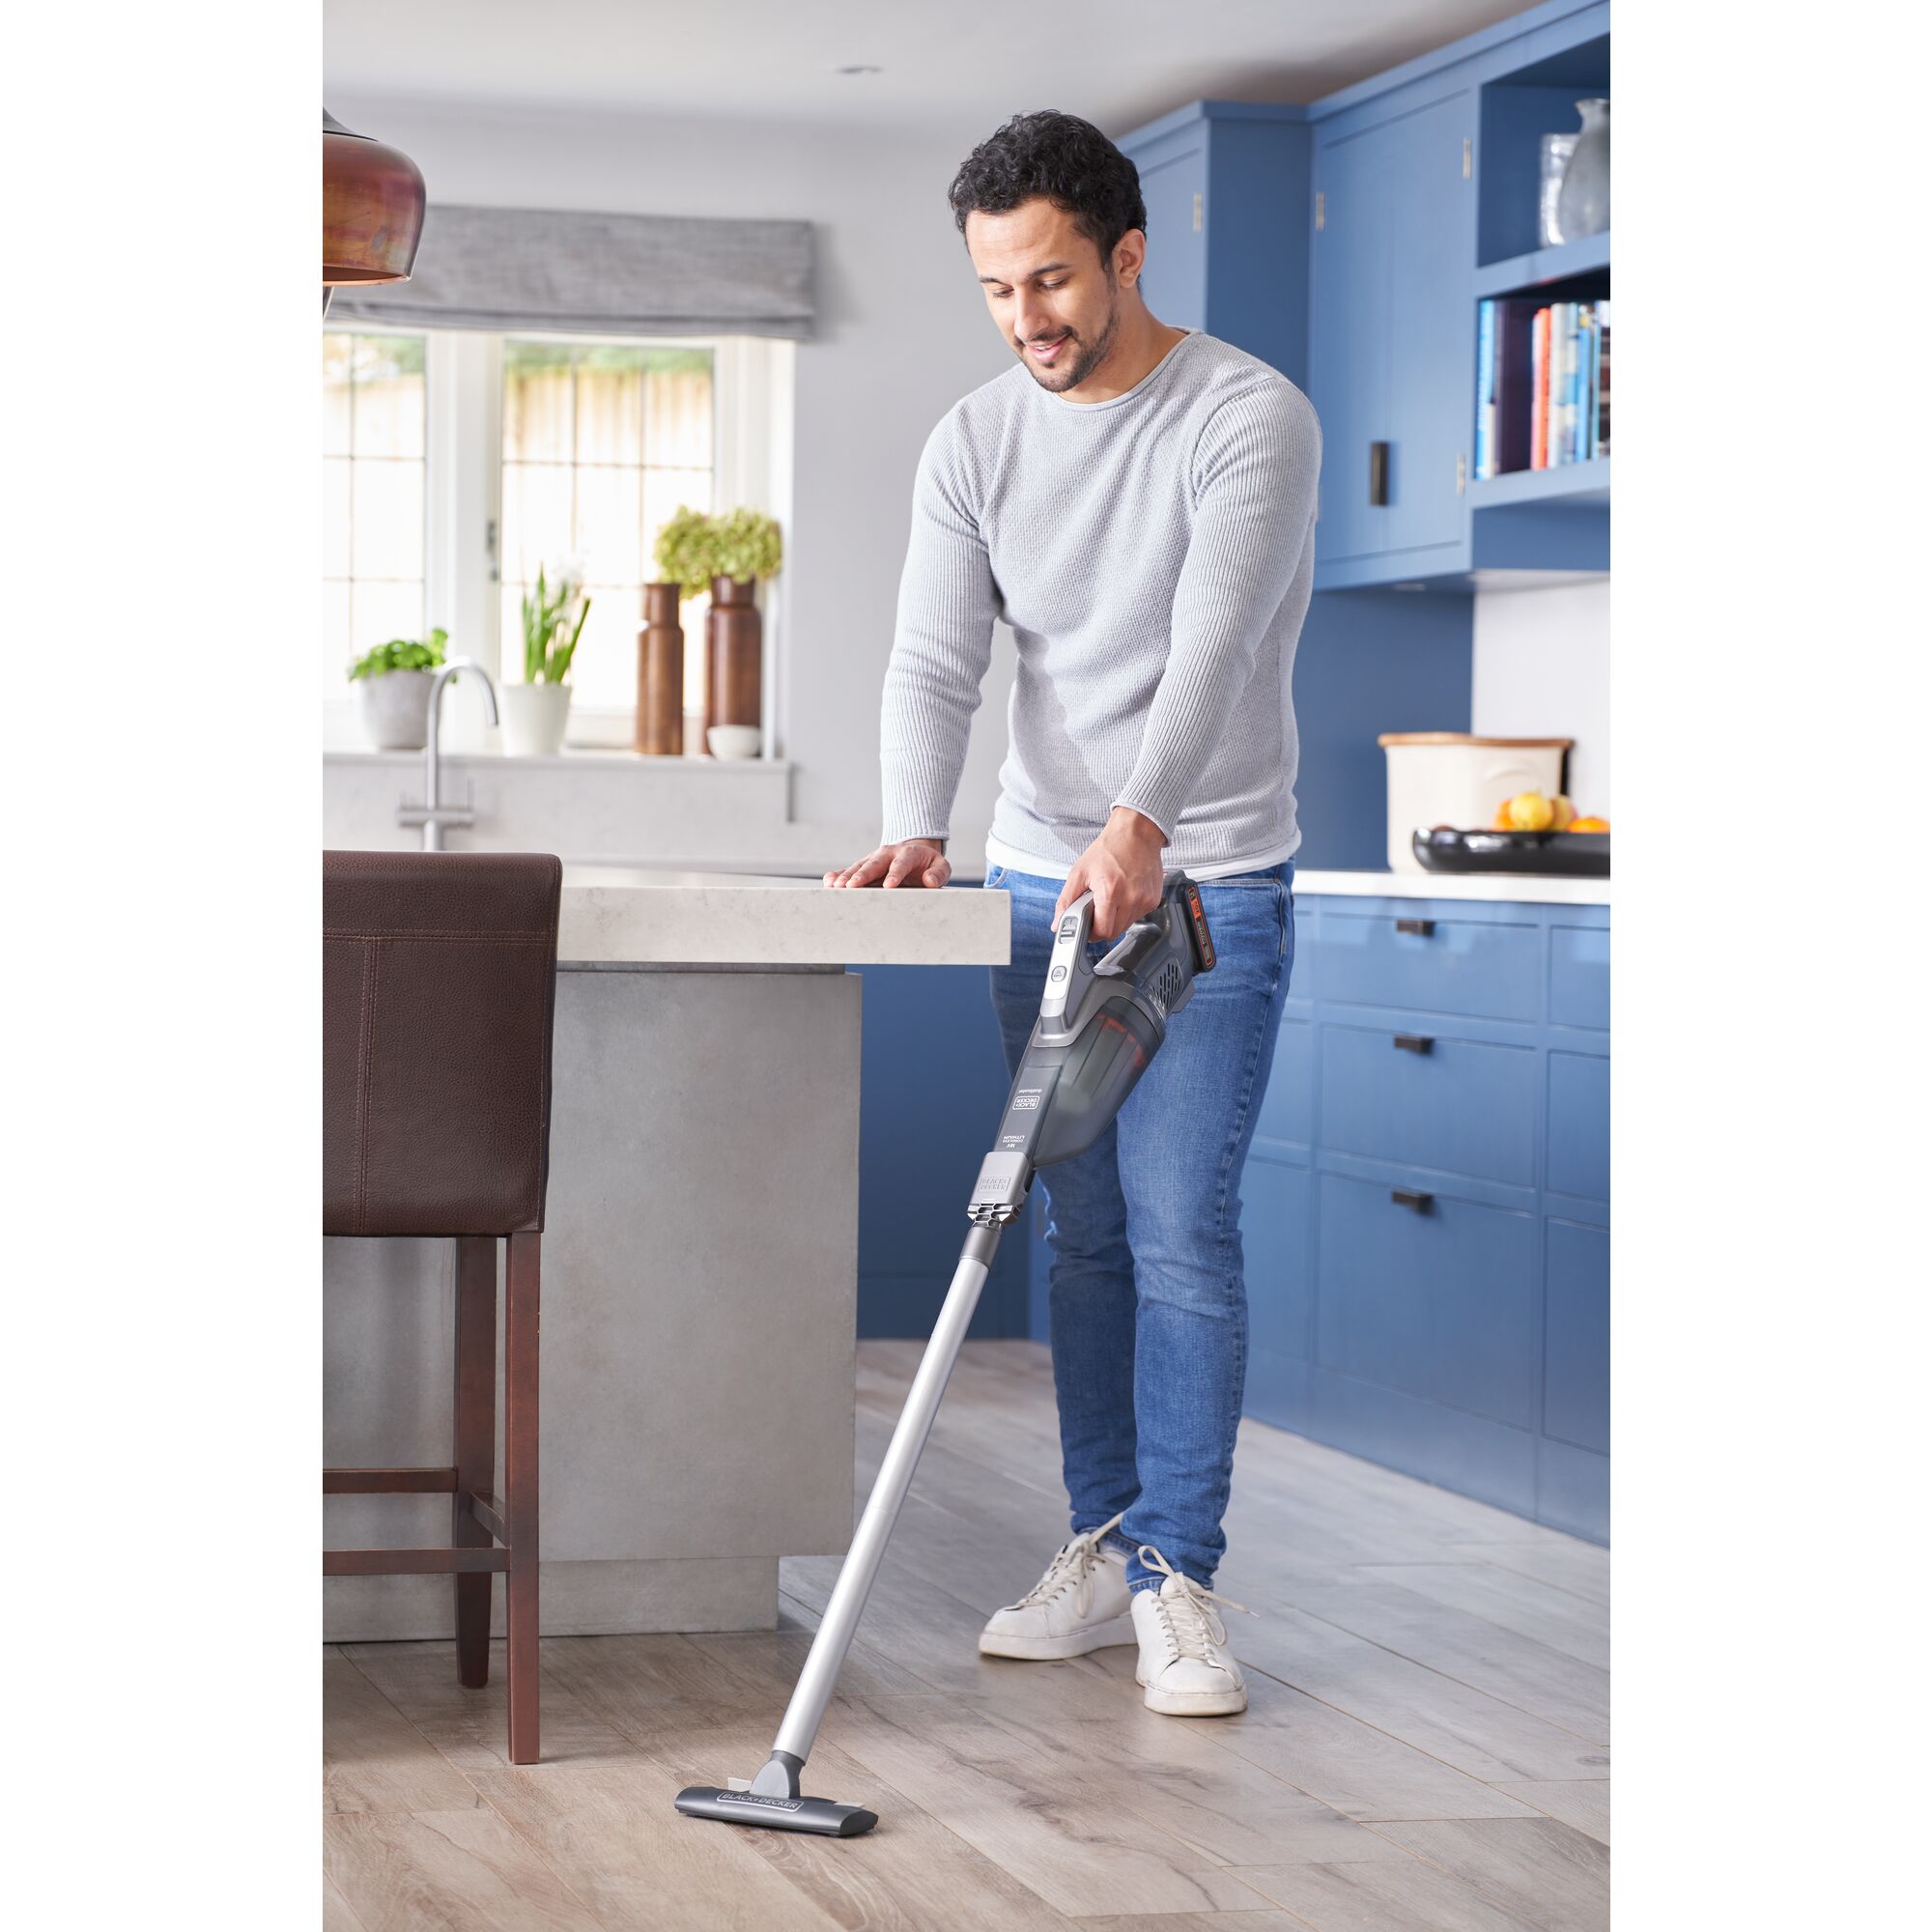 Person using 20 volt MAX Powerconnect handheld vacuum extension to clean up hard kitchen floor surface